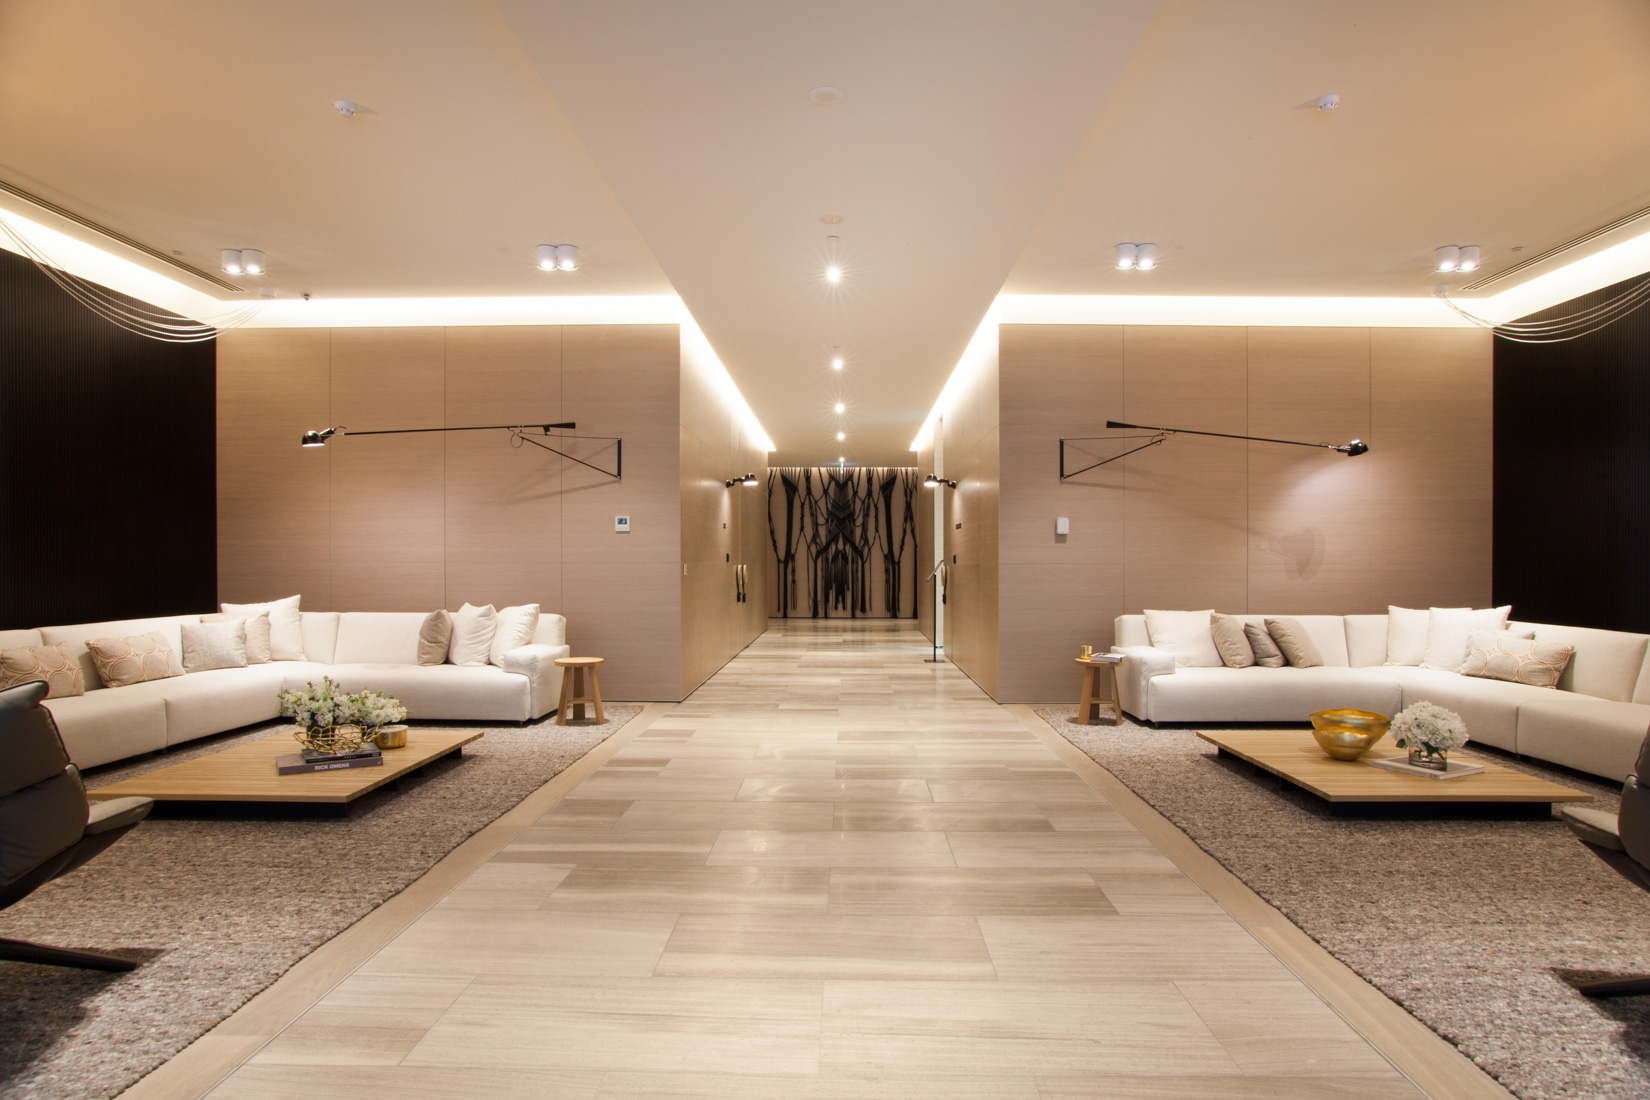 Architectural common areas created by ISM Interiors for the newly developed apartment building, Concavo, in Melbourne.